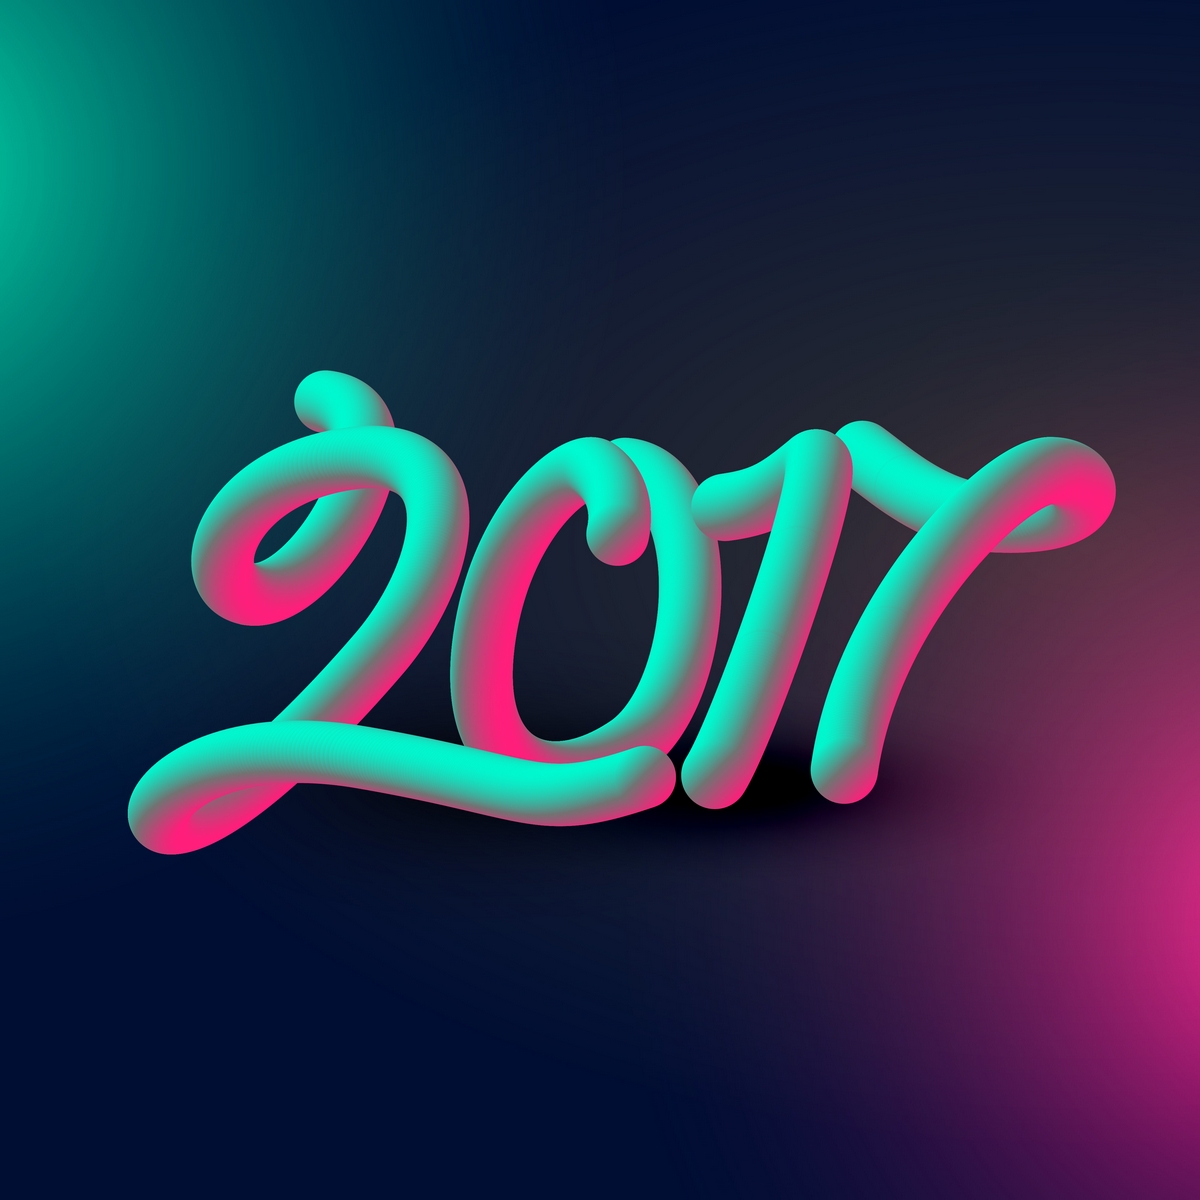 Happy New Year 2017 Wallpapers - Efeito Texto 3d - HD Wallpaper 